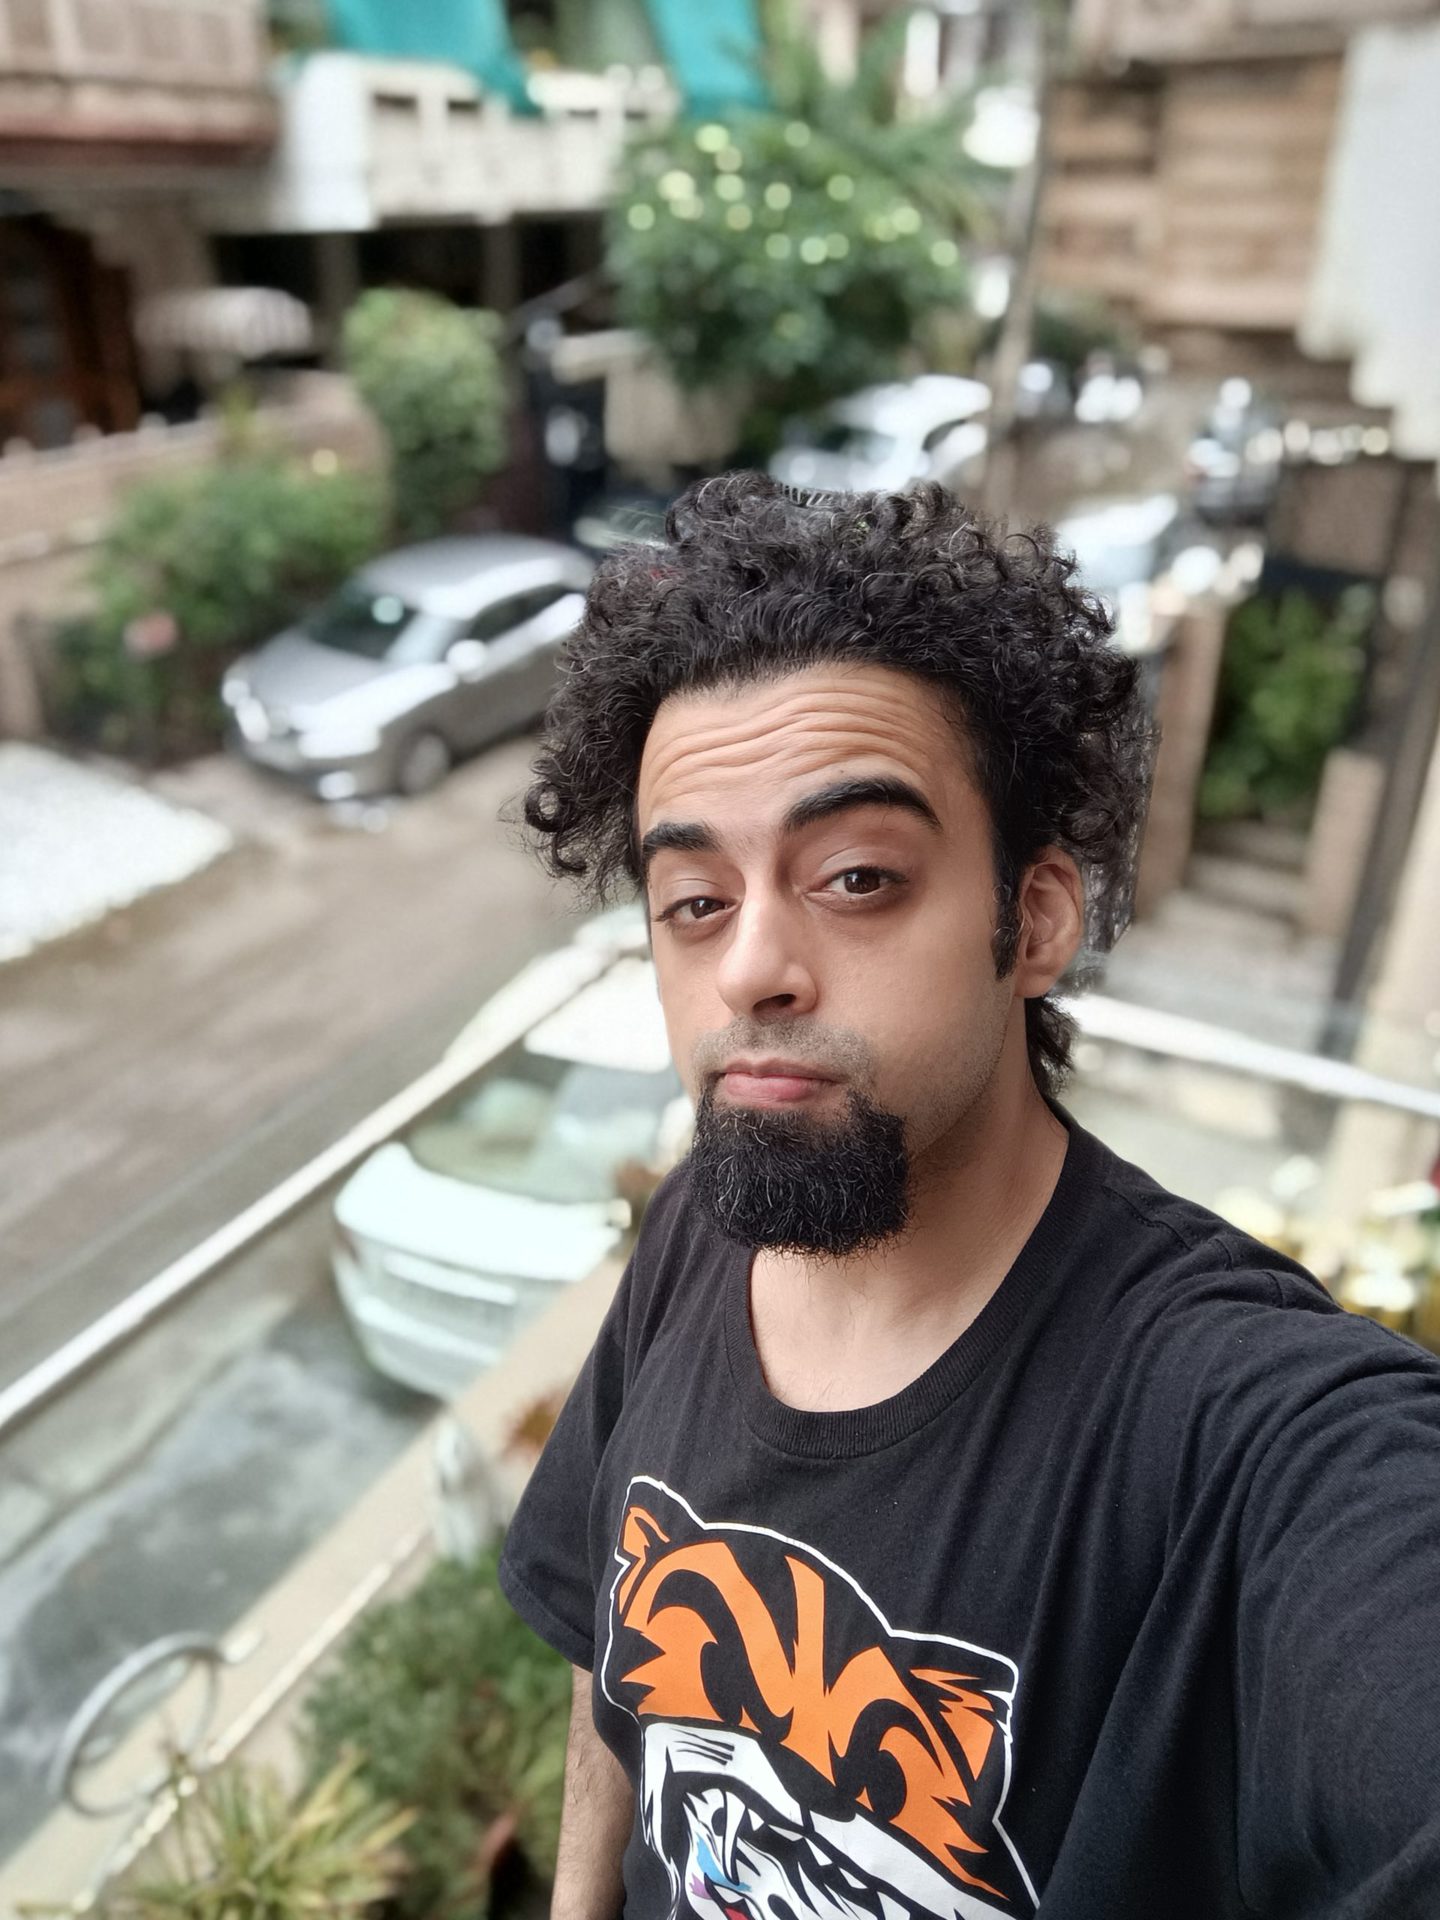 The Oppo Reno 6 Pro selfie portrait mode showing a man with black hair and beard in a black t-shirt with orange pattern standing on a balcony above the street below.